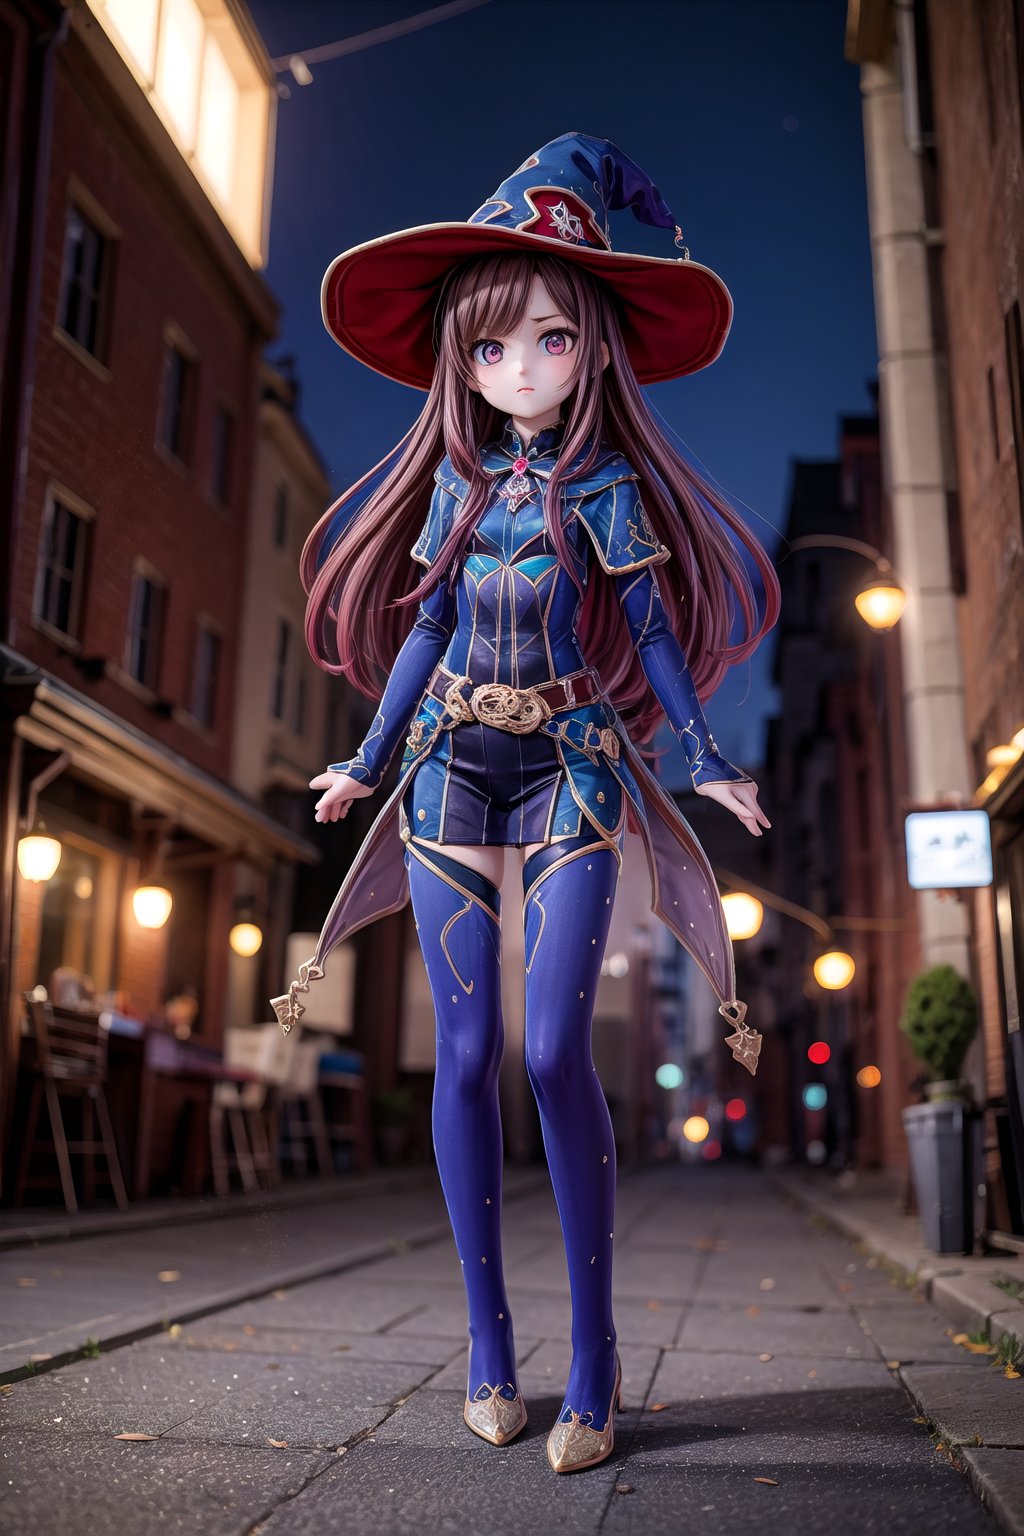 Mona_Impact, full_body, outdoor, beautiful 25 years old girl, blurry_background, witch hat,